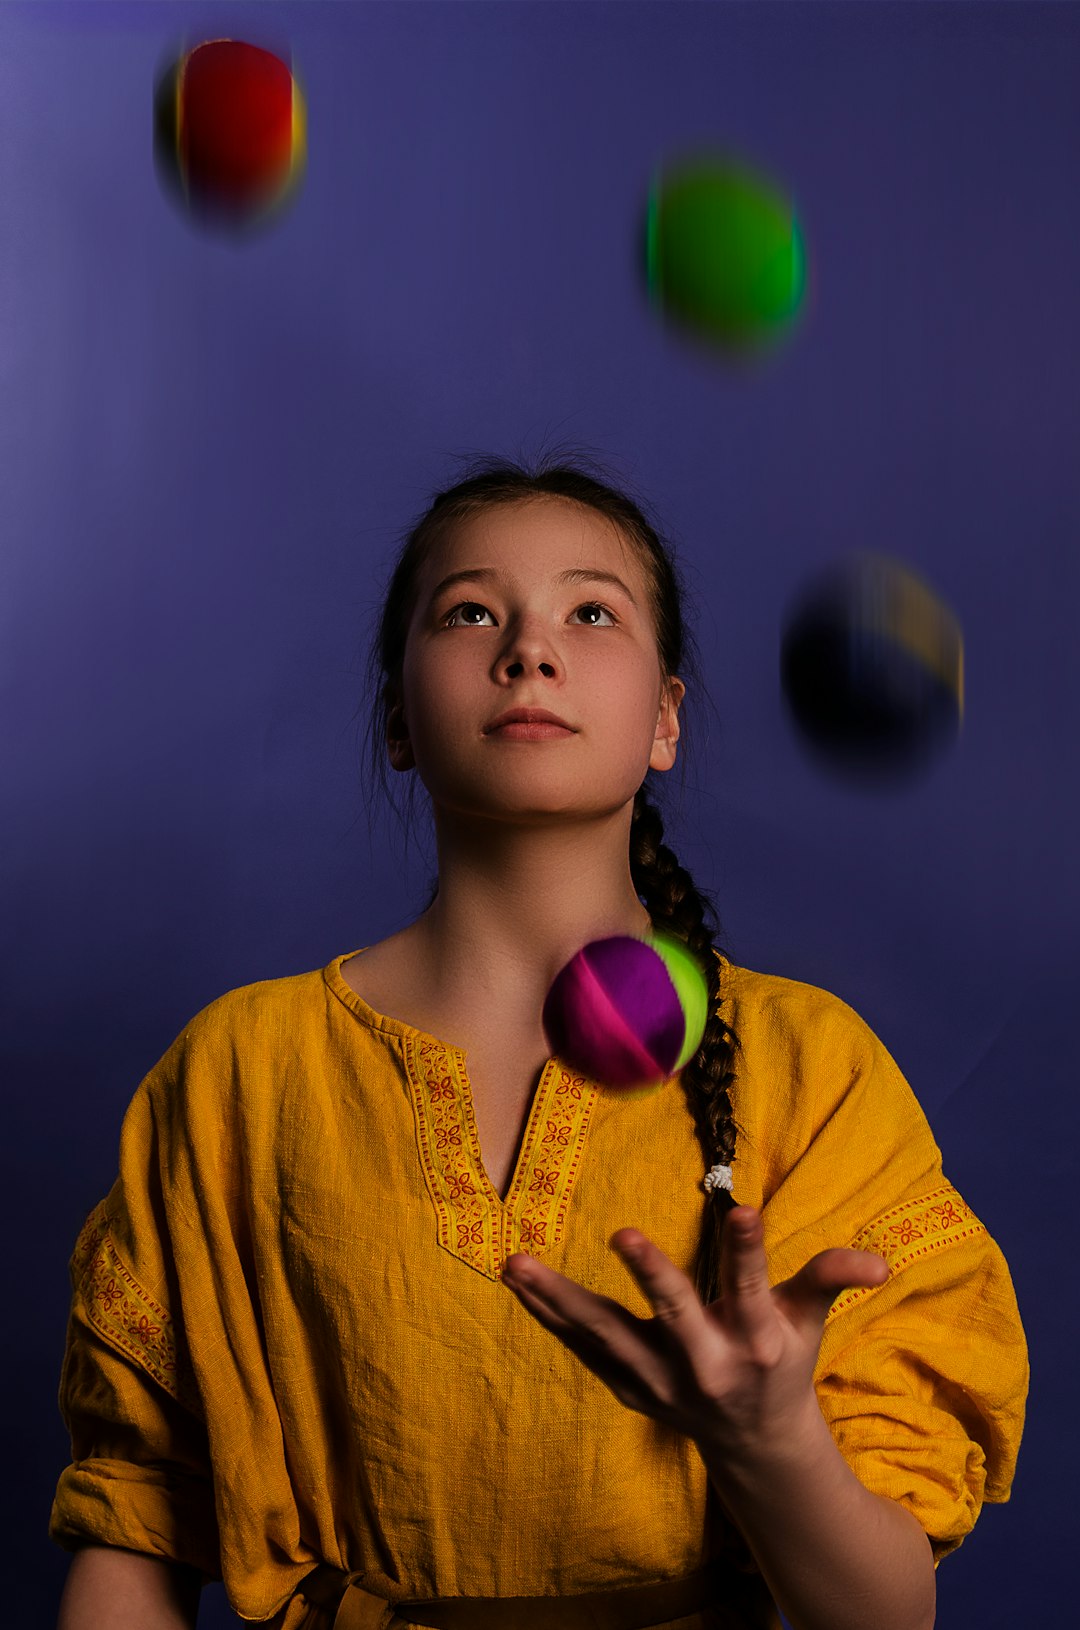 woman playing assorted-color balls